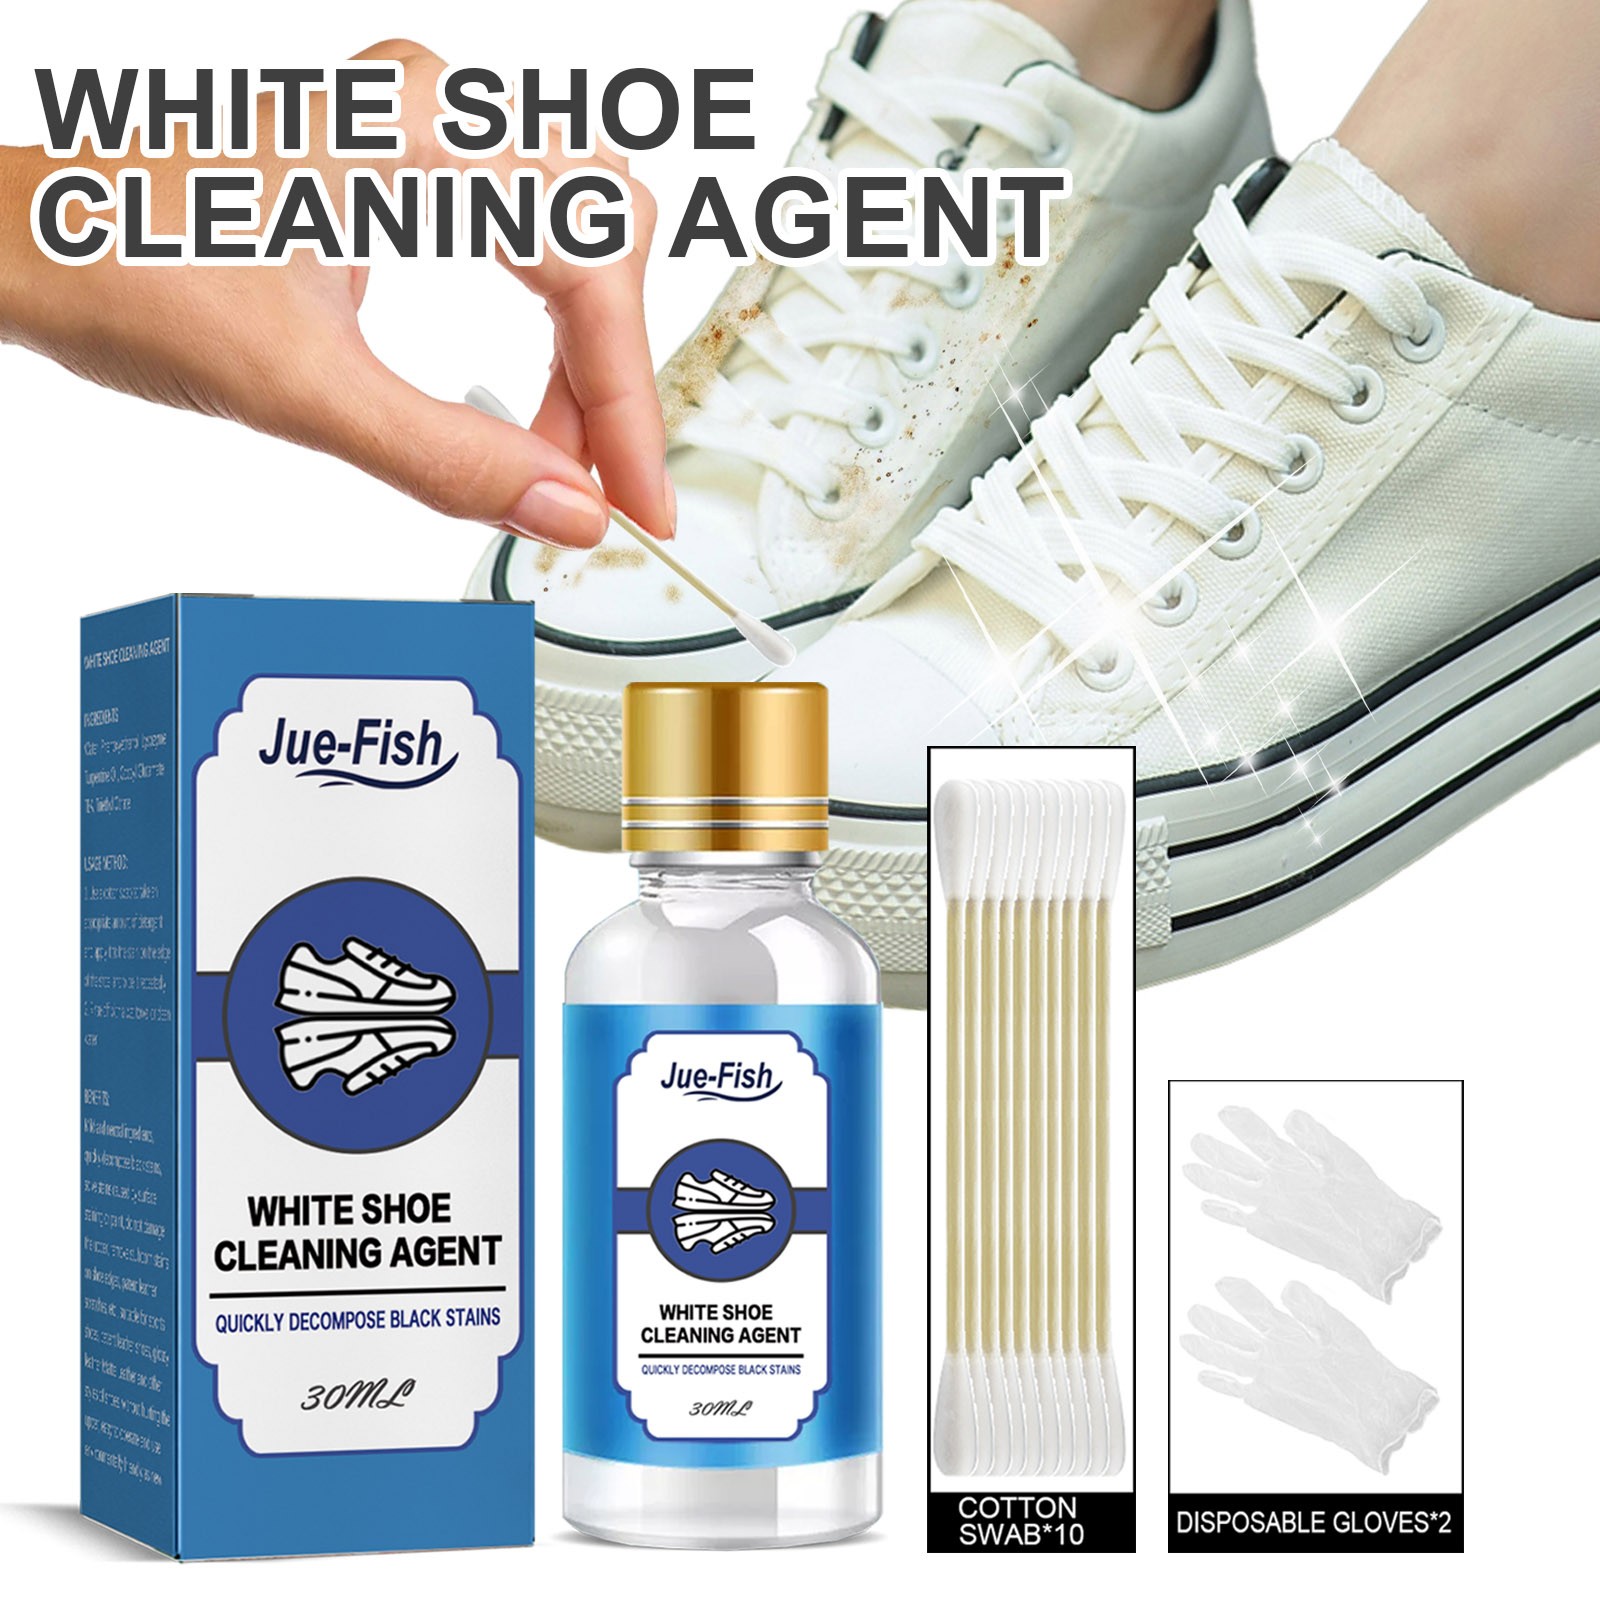 AZZAKVG White Shoe Cleaner 30ml for Black Stains and Scratches on Patentss Leather of White Shoes and Leather Shoe Cleaner for White Shoes Sneaker Cleaner